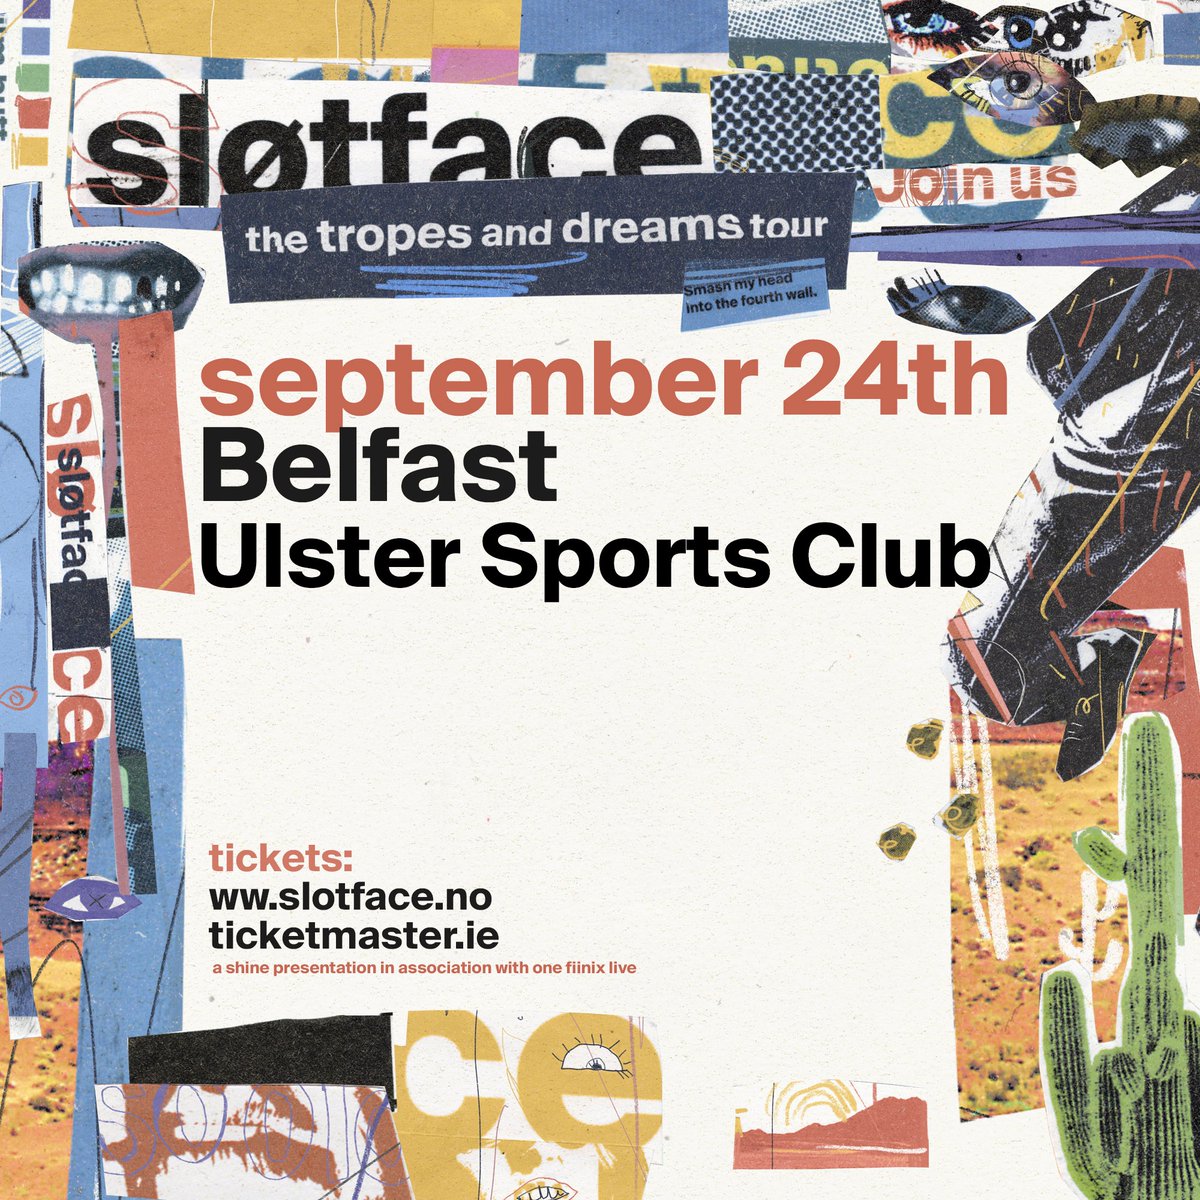 𝗡𝗘𝗪 𝗦𝗛𝗢𝗪: Norwegian pop-punk band @slotfaceband are set for Ulster Sports Club this September 24th! ❤️‍🔥 ➡️ Tickets on sale Friday at 9am from Ticketmaster